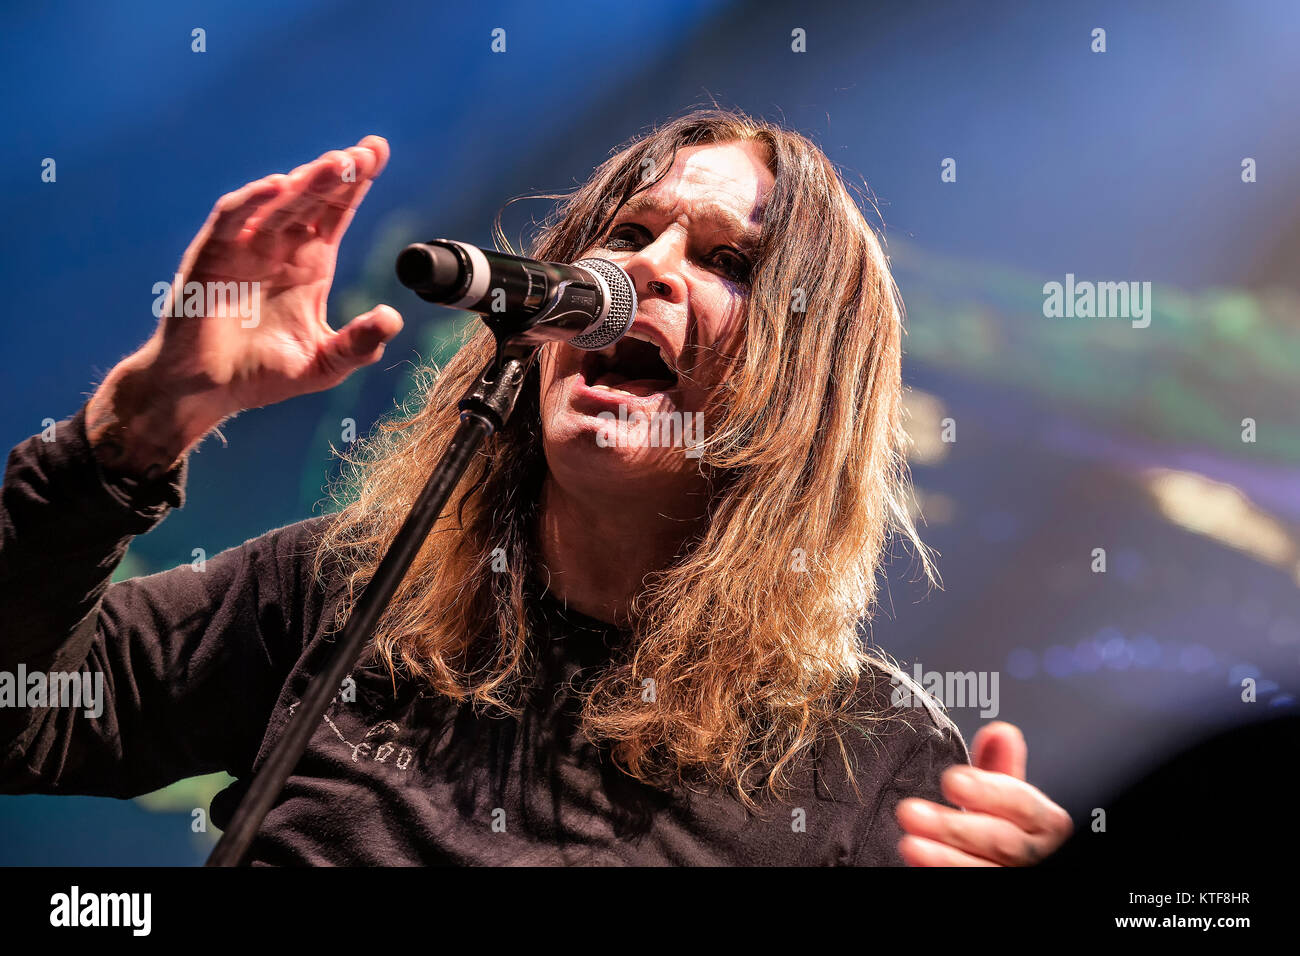 The English rock band Black Sabbath performs a live concert at Telenor Arena in Oslo. Here singer and TV-celebrity Ozzy Osbourne is seen live on stage. Norway, 24/11 2013. Stock Photo